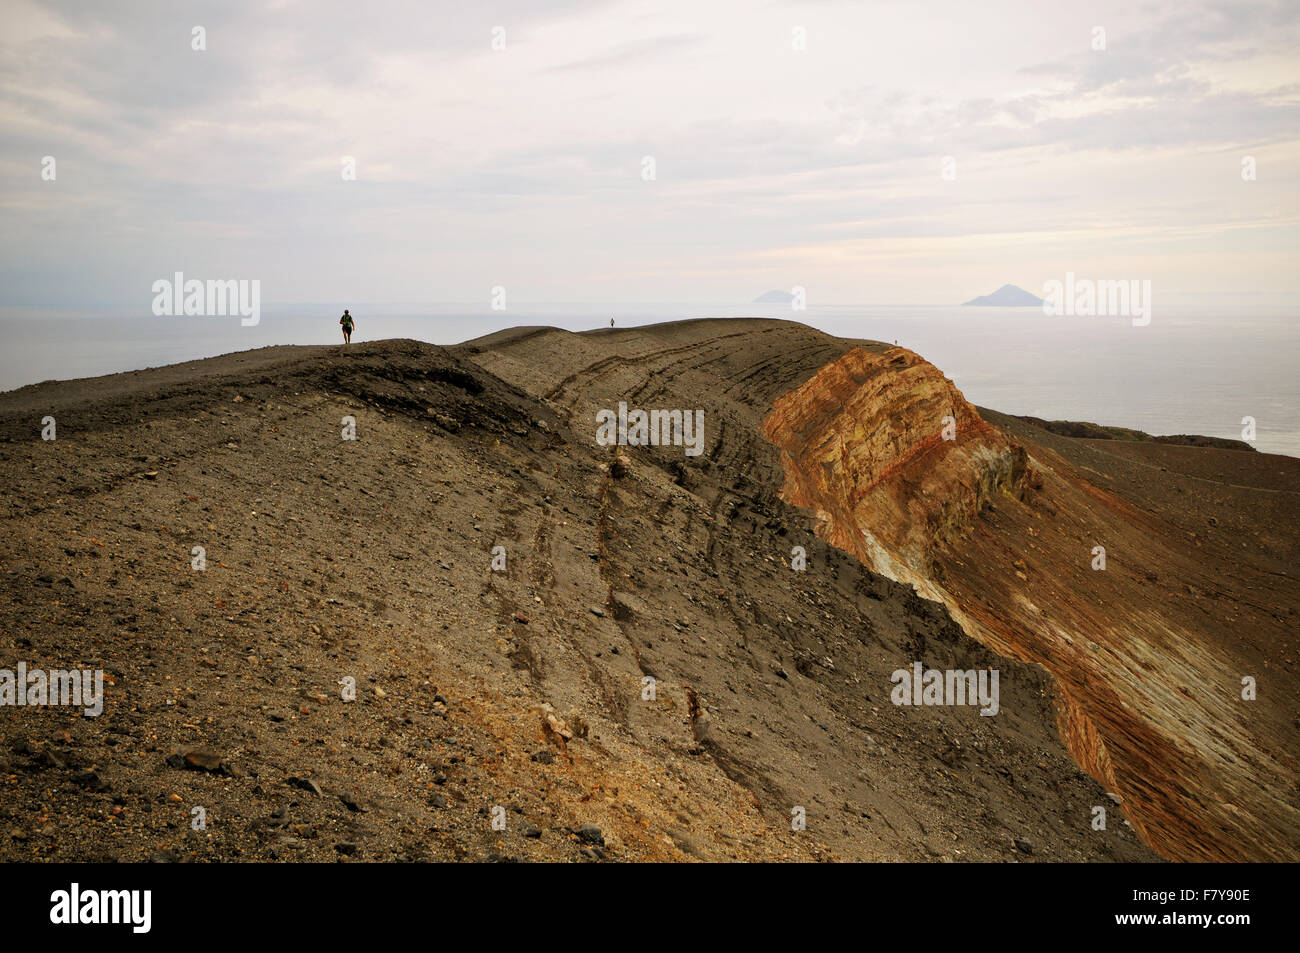 Hikers walking on the ridge of the active crater (Gran Cratere) of Vulcano, Aeolian Islands, Sicily, Italy Stock Photo